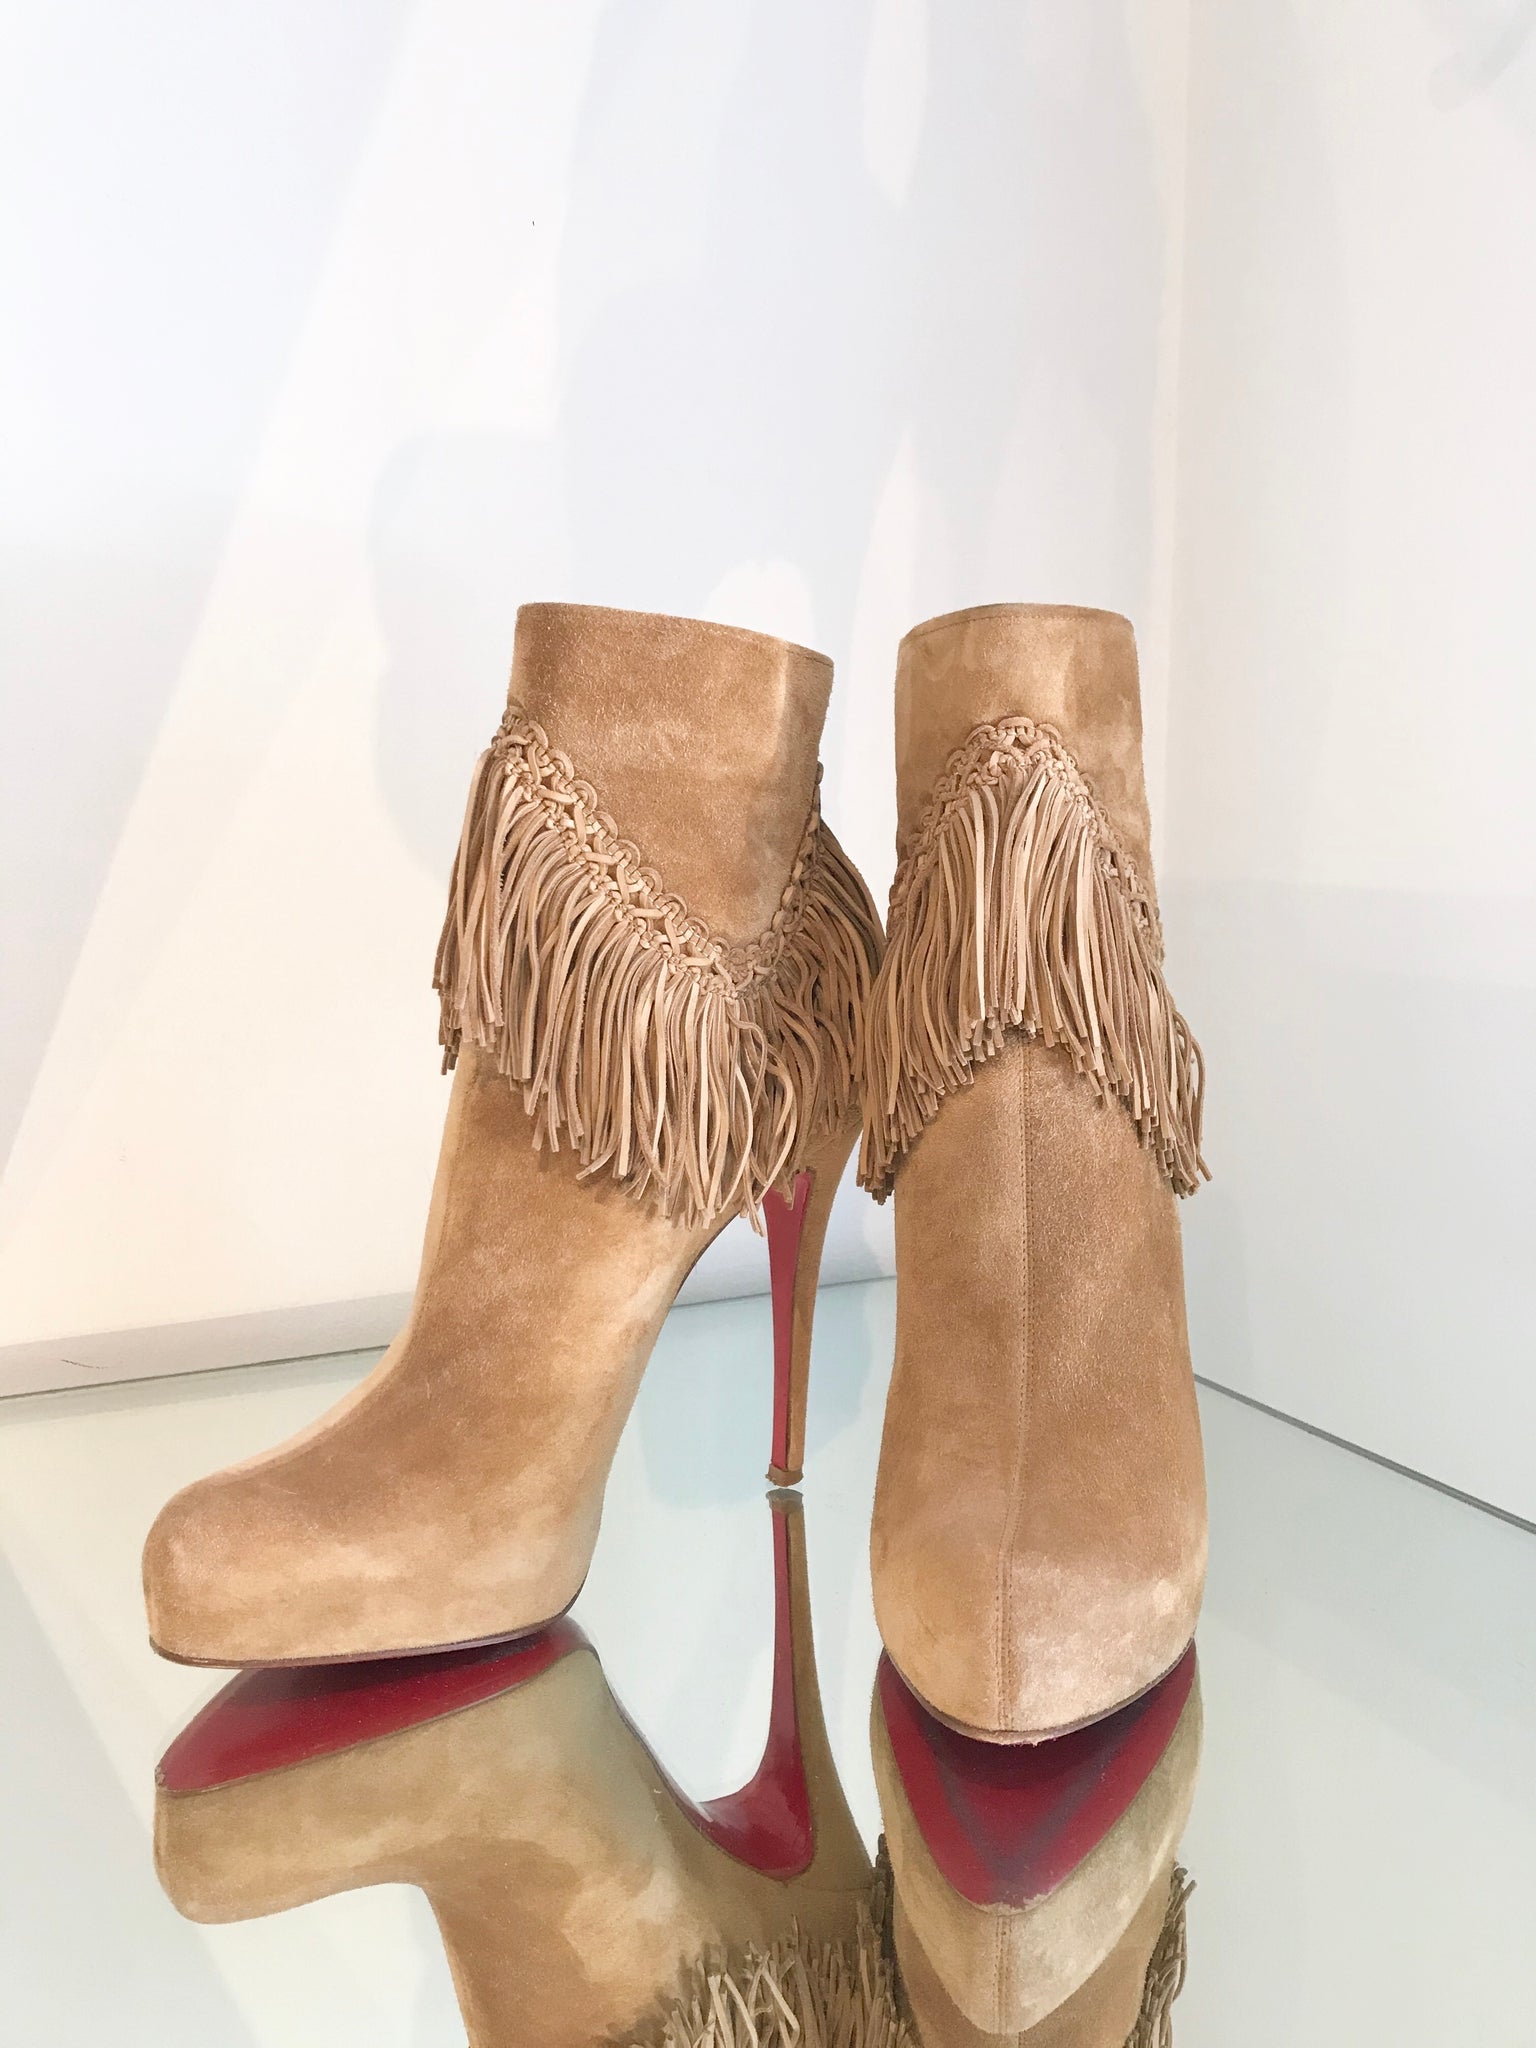 Christian Louboutin ROM 120 Suede Fringe Platform Ankle Bootie Boots 36 EU  $1295